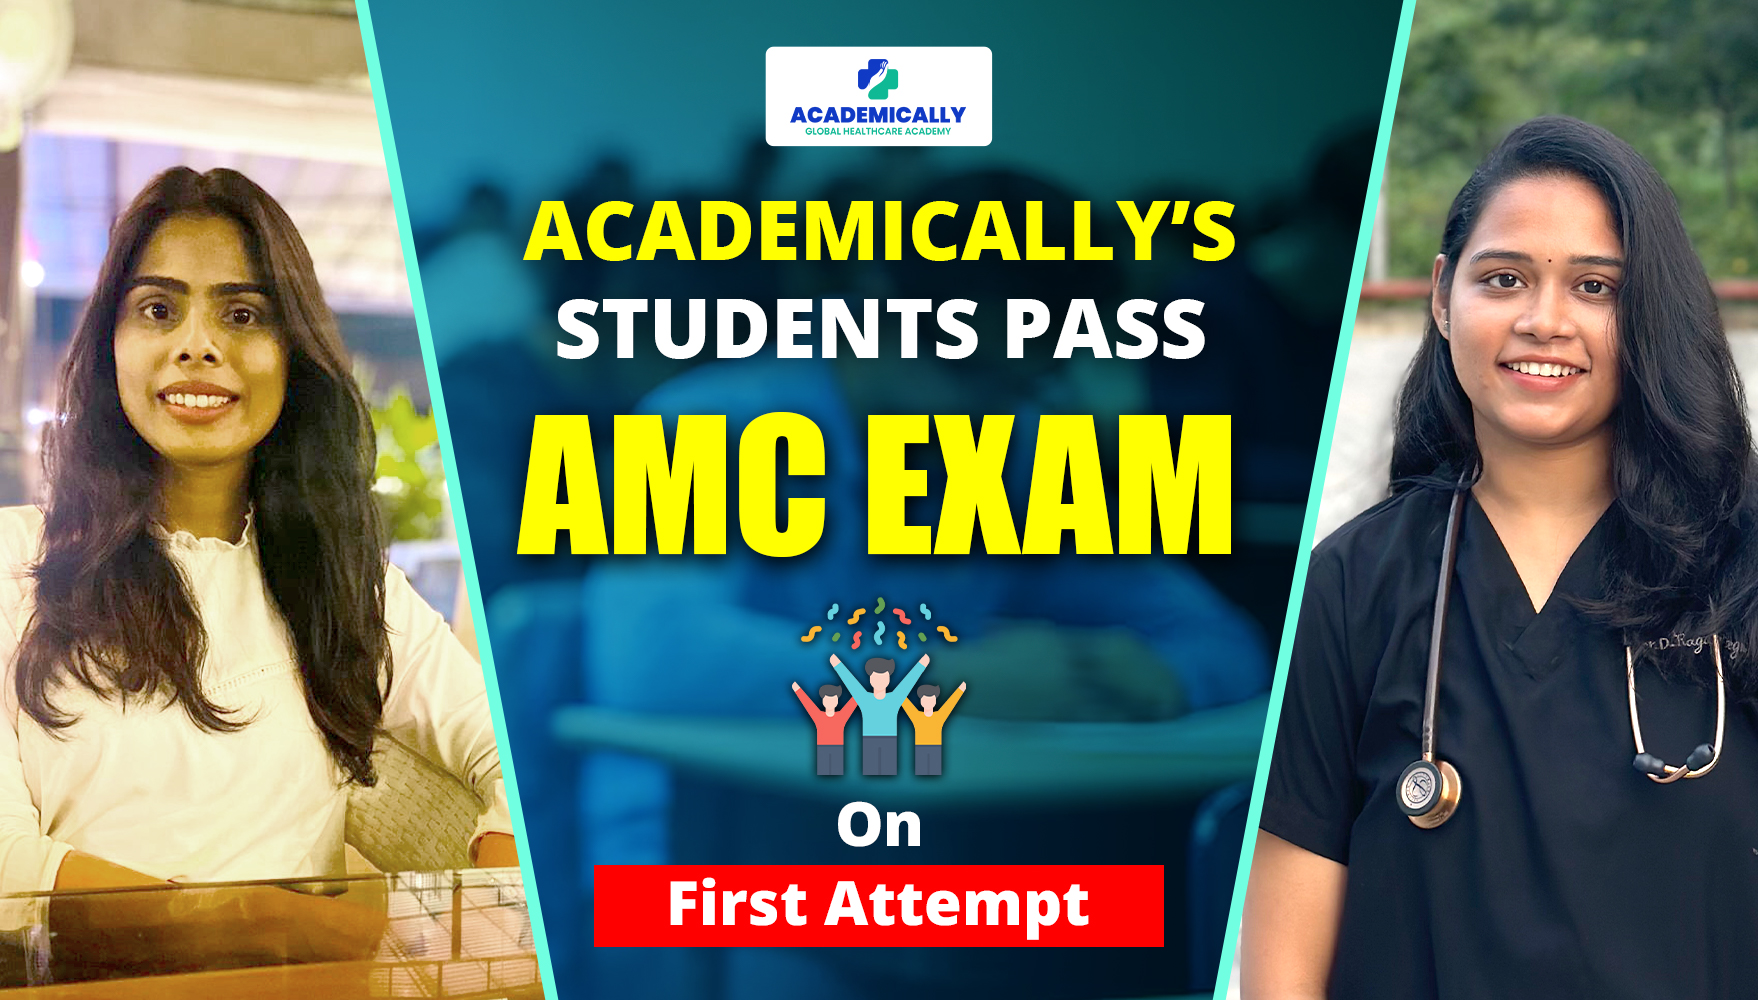 AMC Exam On First Attempt